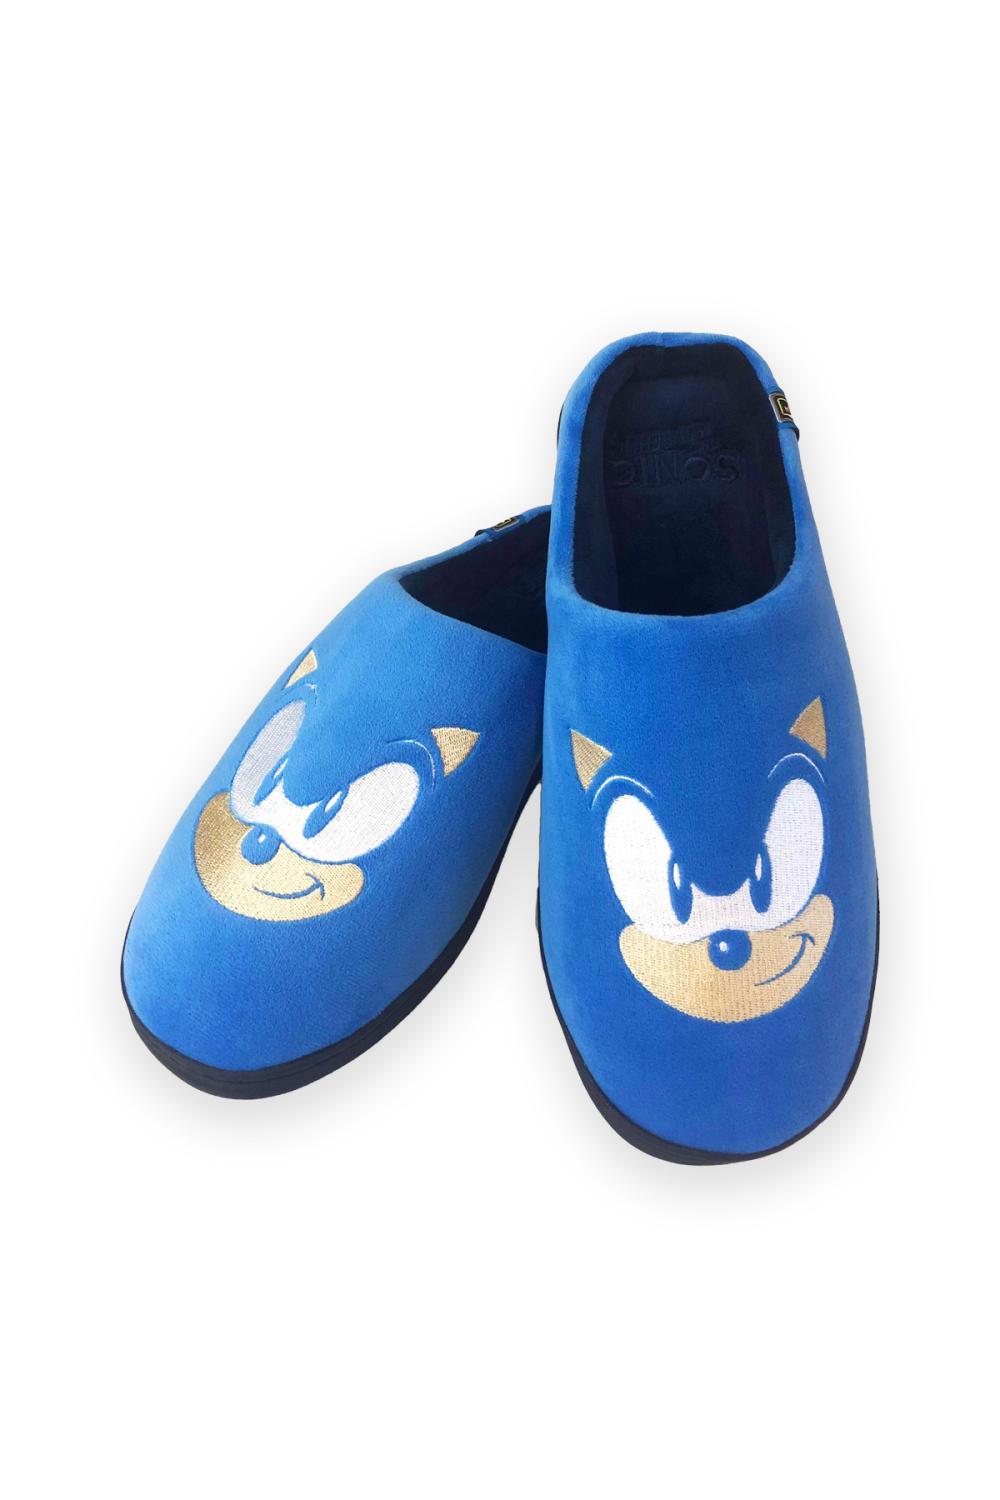 Sonic class of 91 Mule Slippers Blue Adult Large UK 8-10 rubber sole